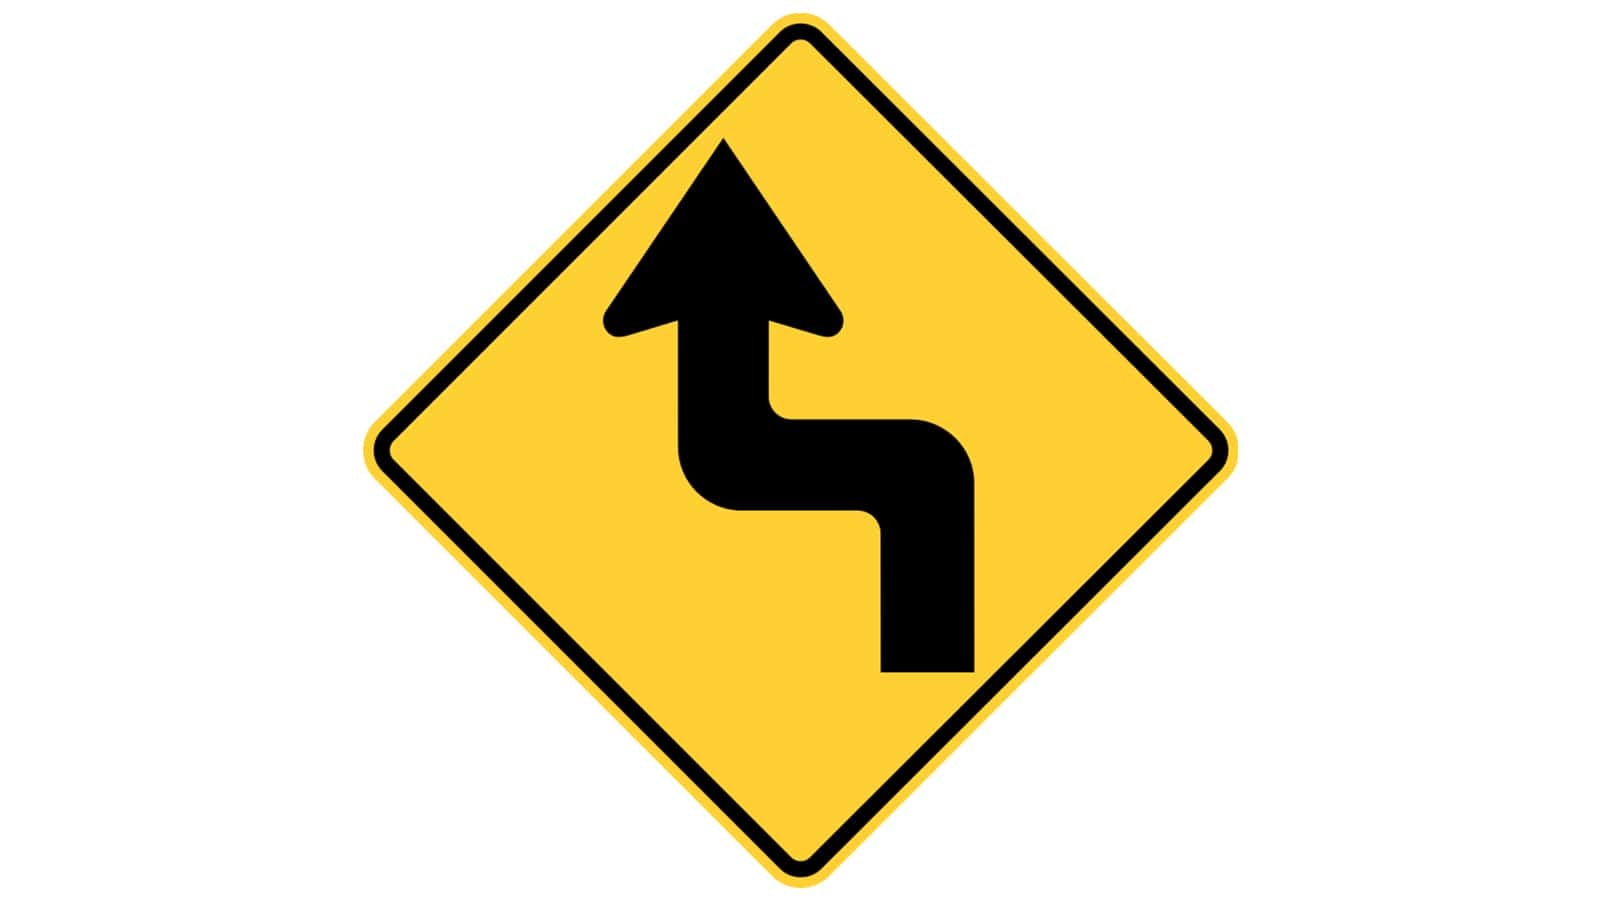 Warning sign reverse turn (first turn to the left)